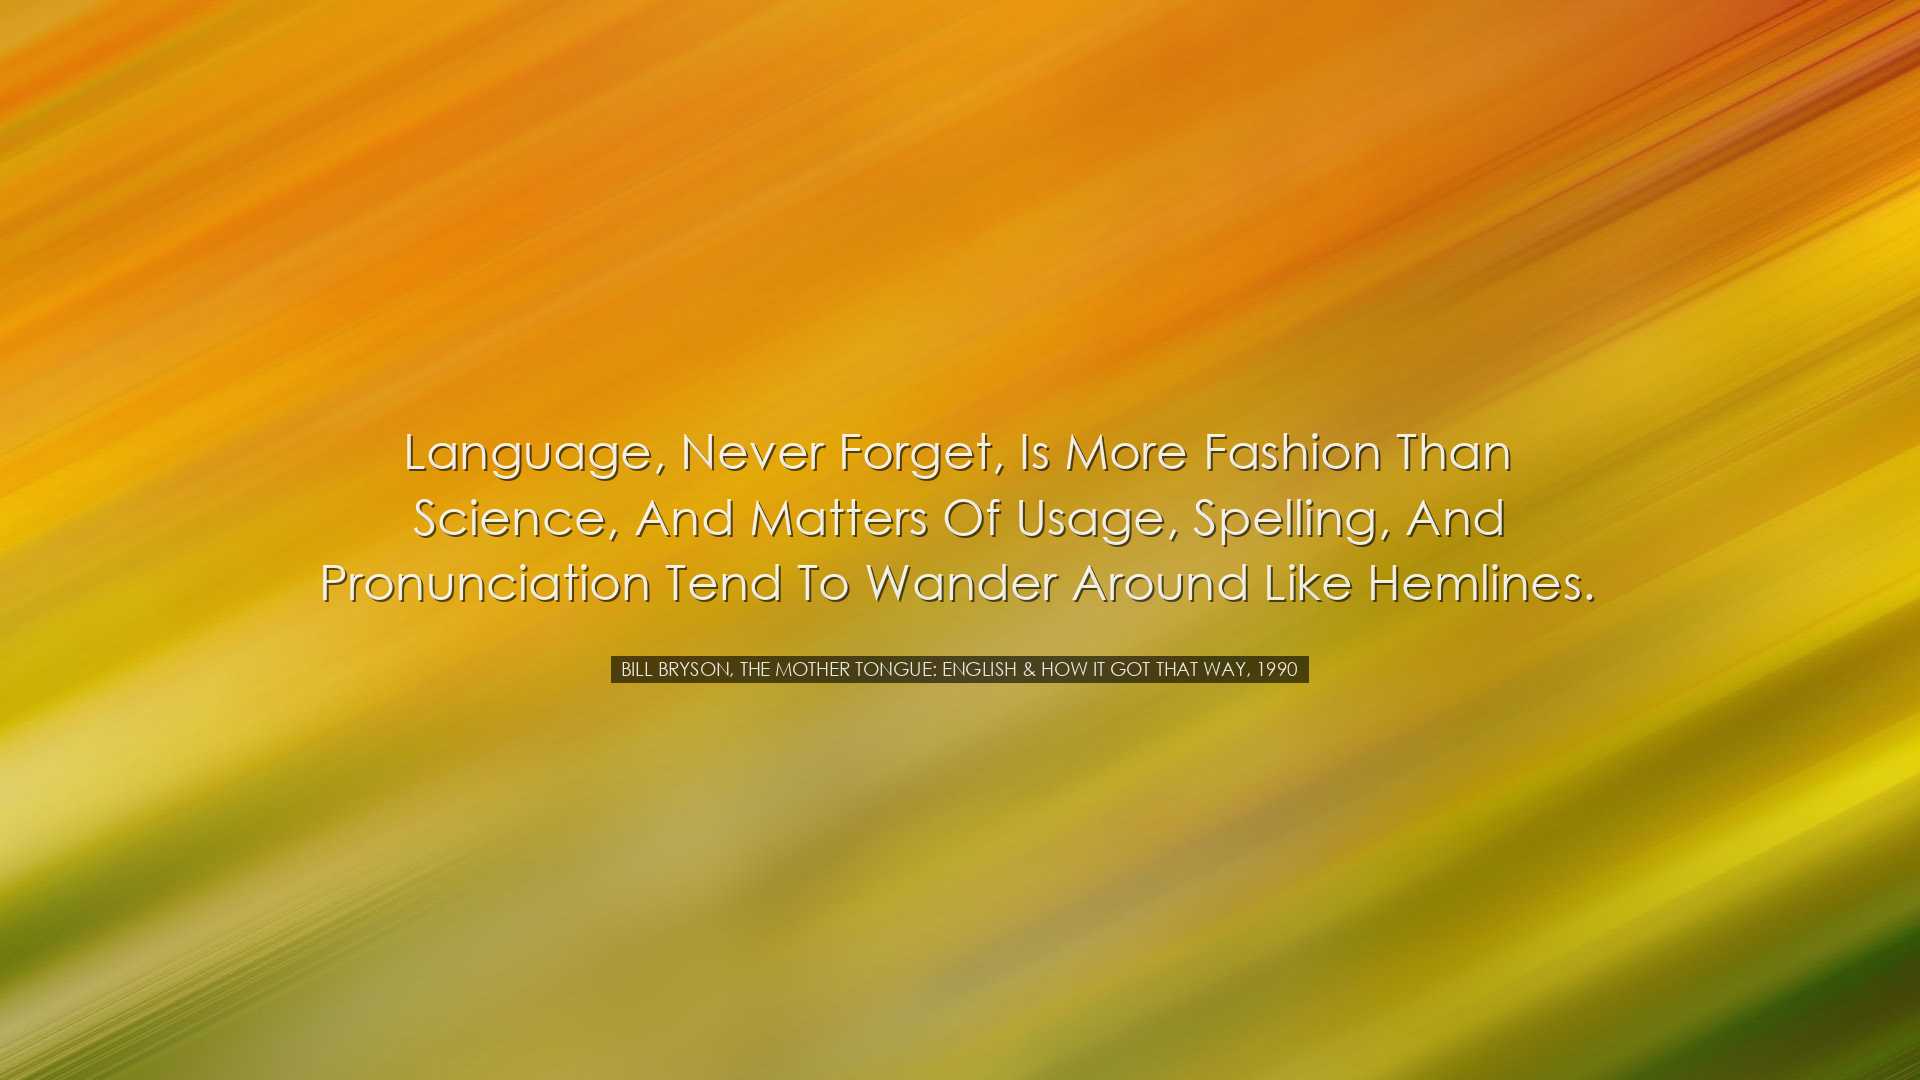 Language, never forget, is more fashion than science, and matters